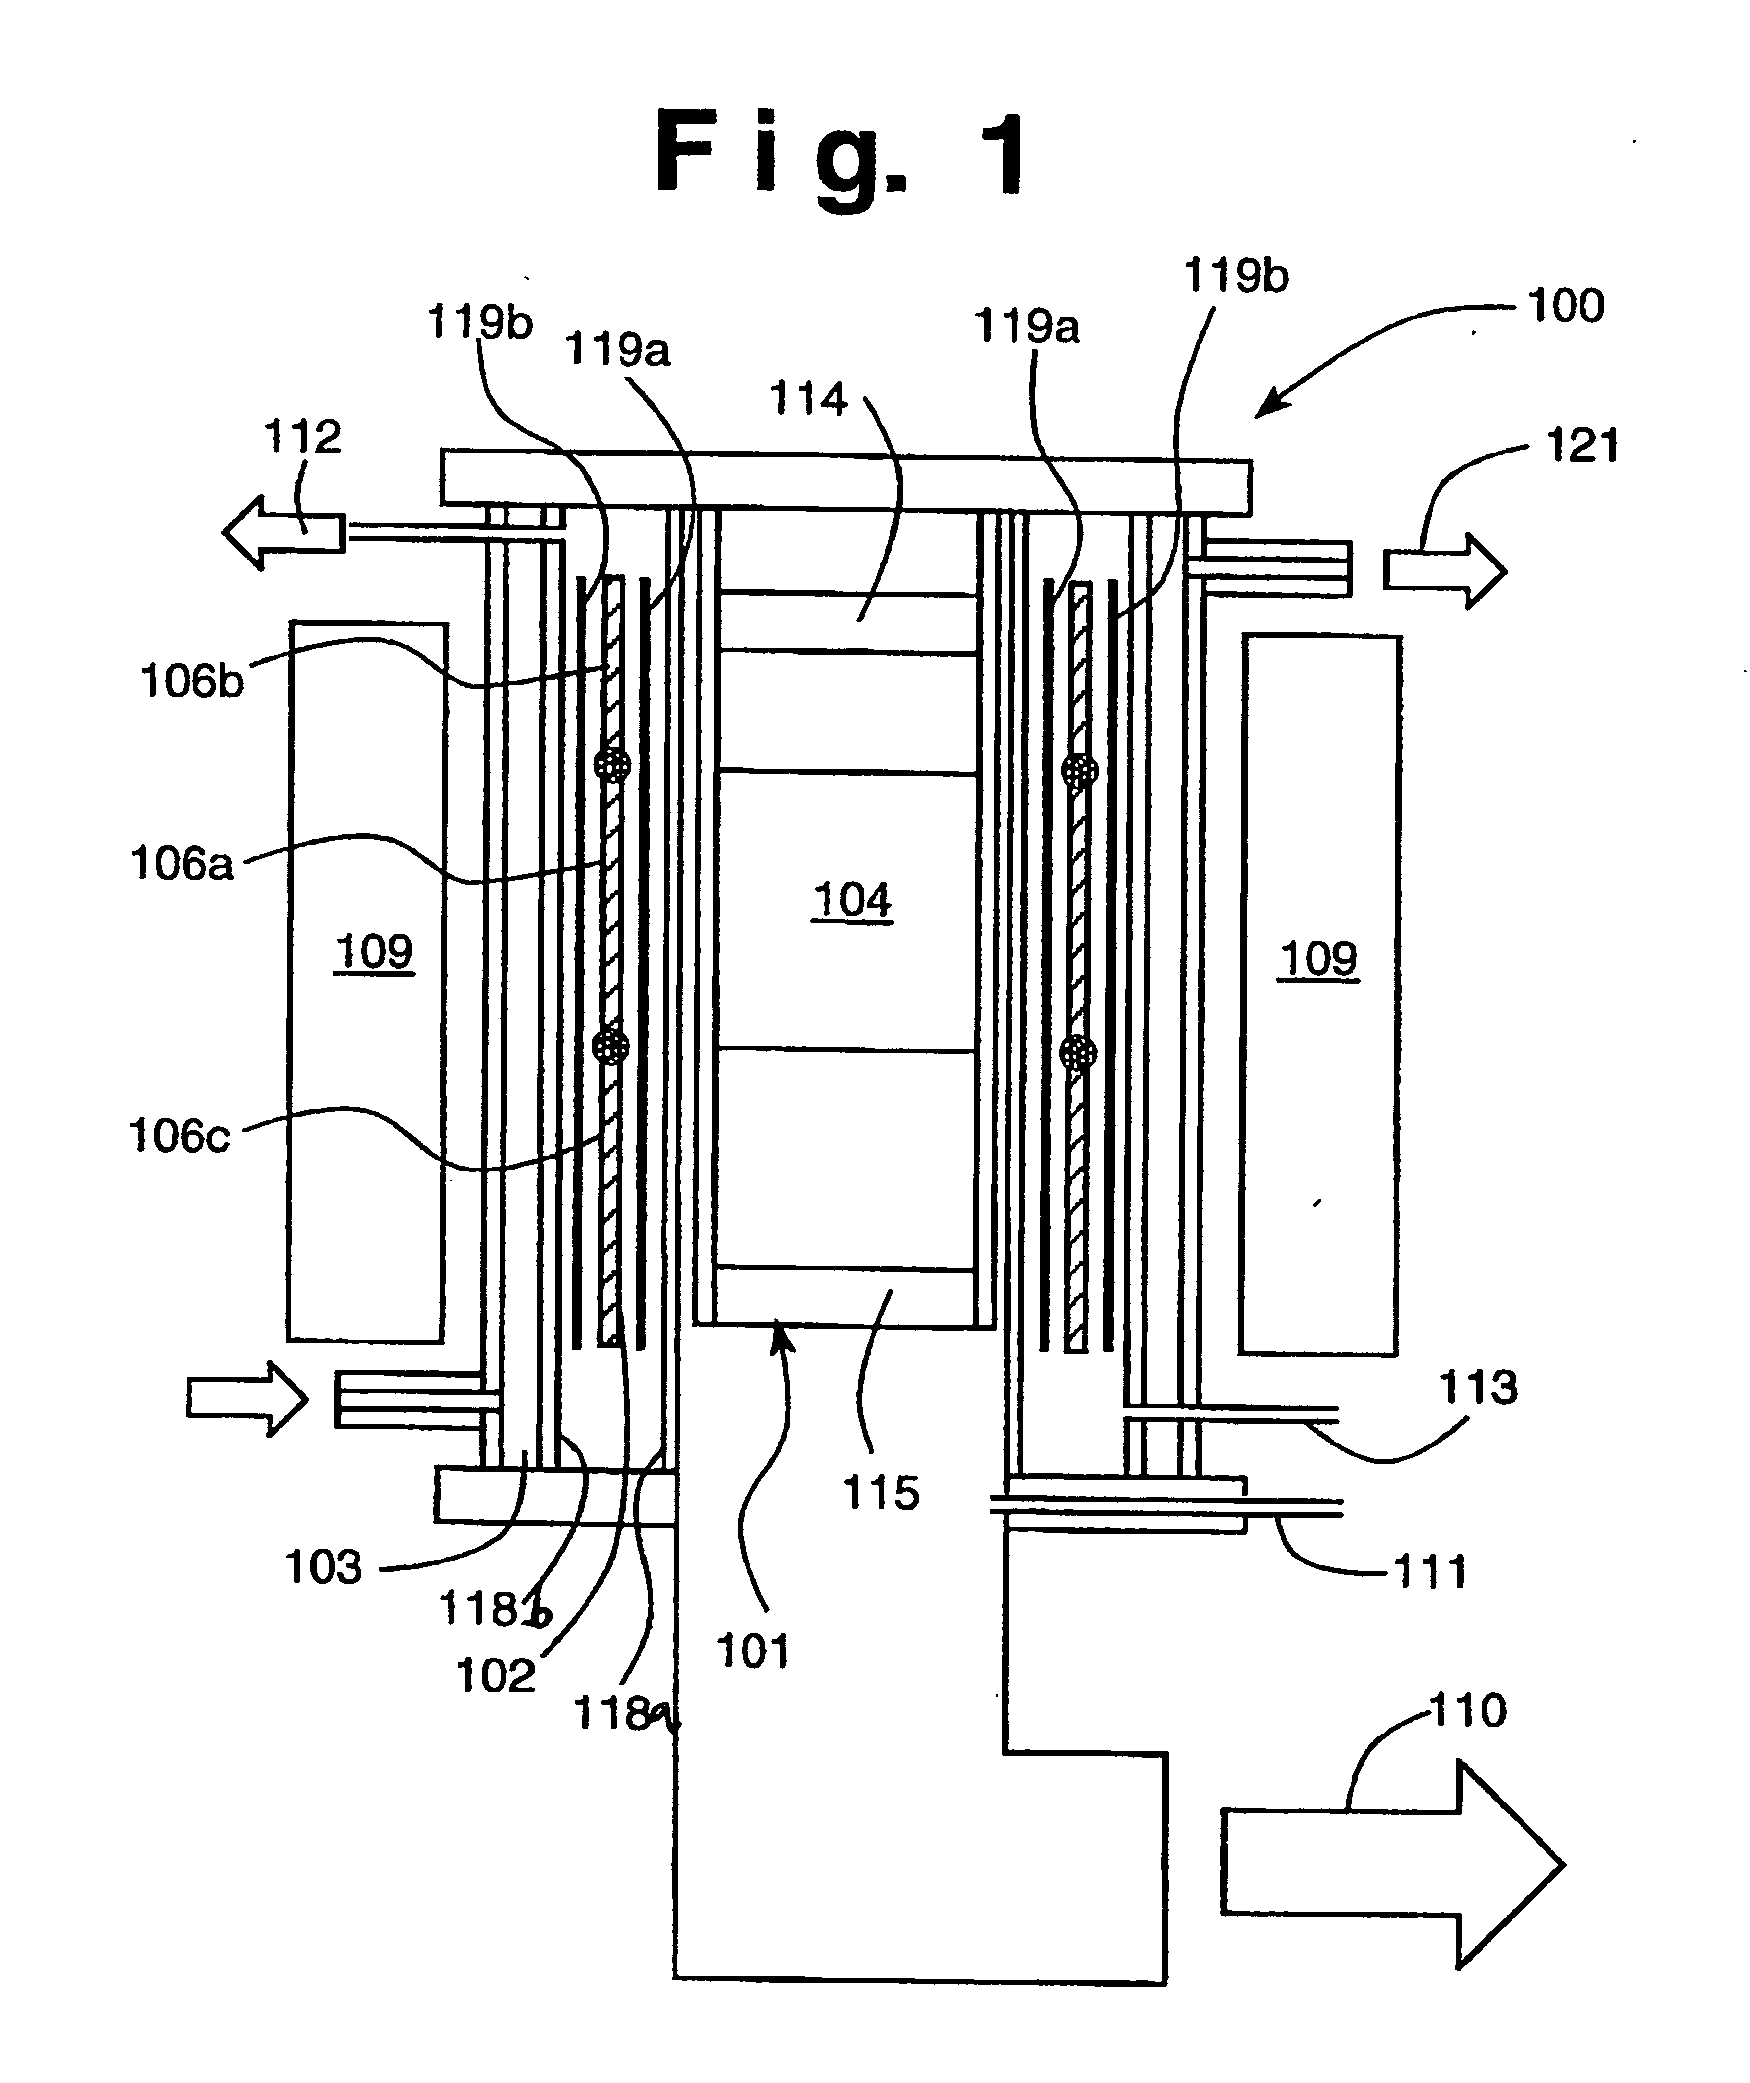 Magnetic annealing tool heat exchange system and processes